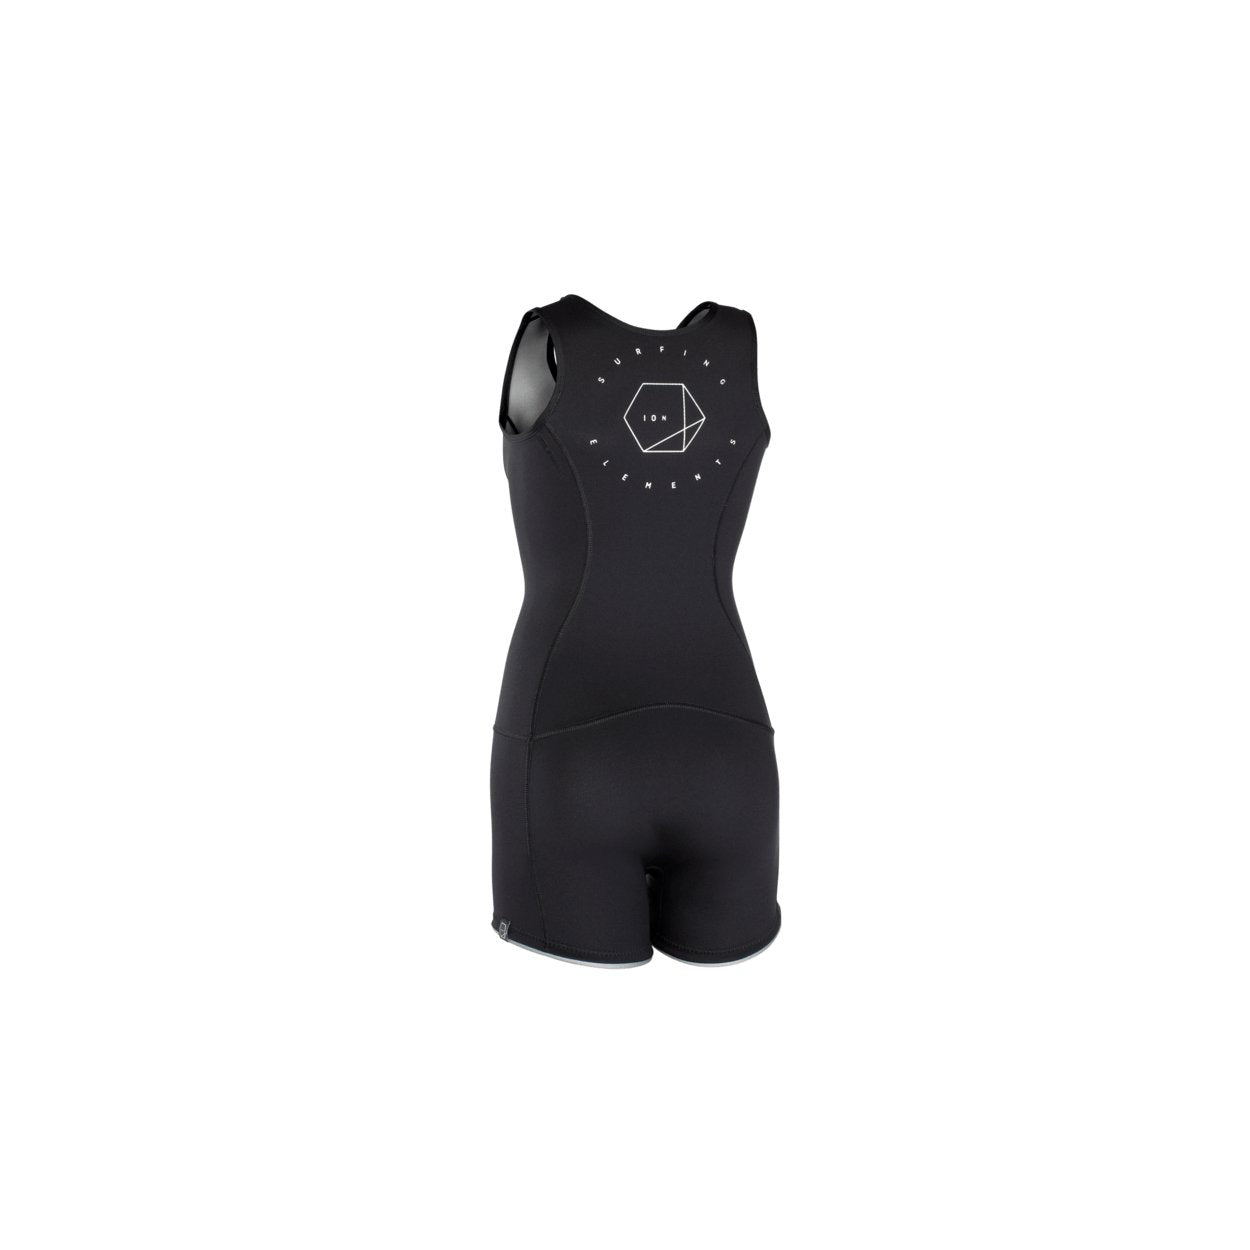 ION Monoshorty 0.5 2022 - Worthing Watersports - 9008415801541 - Wetsuits - ION Water